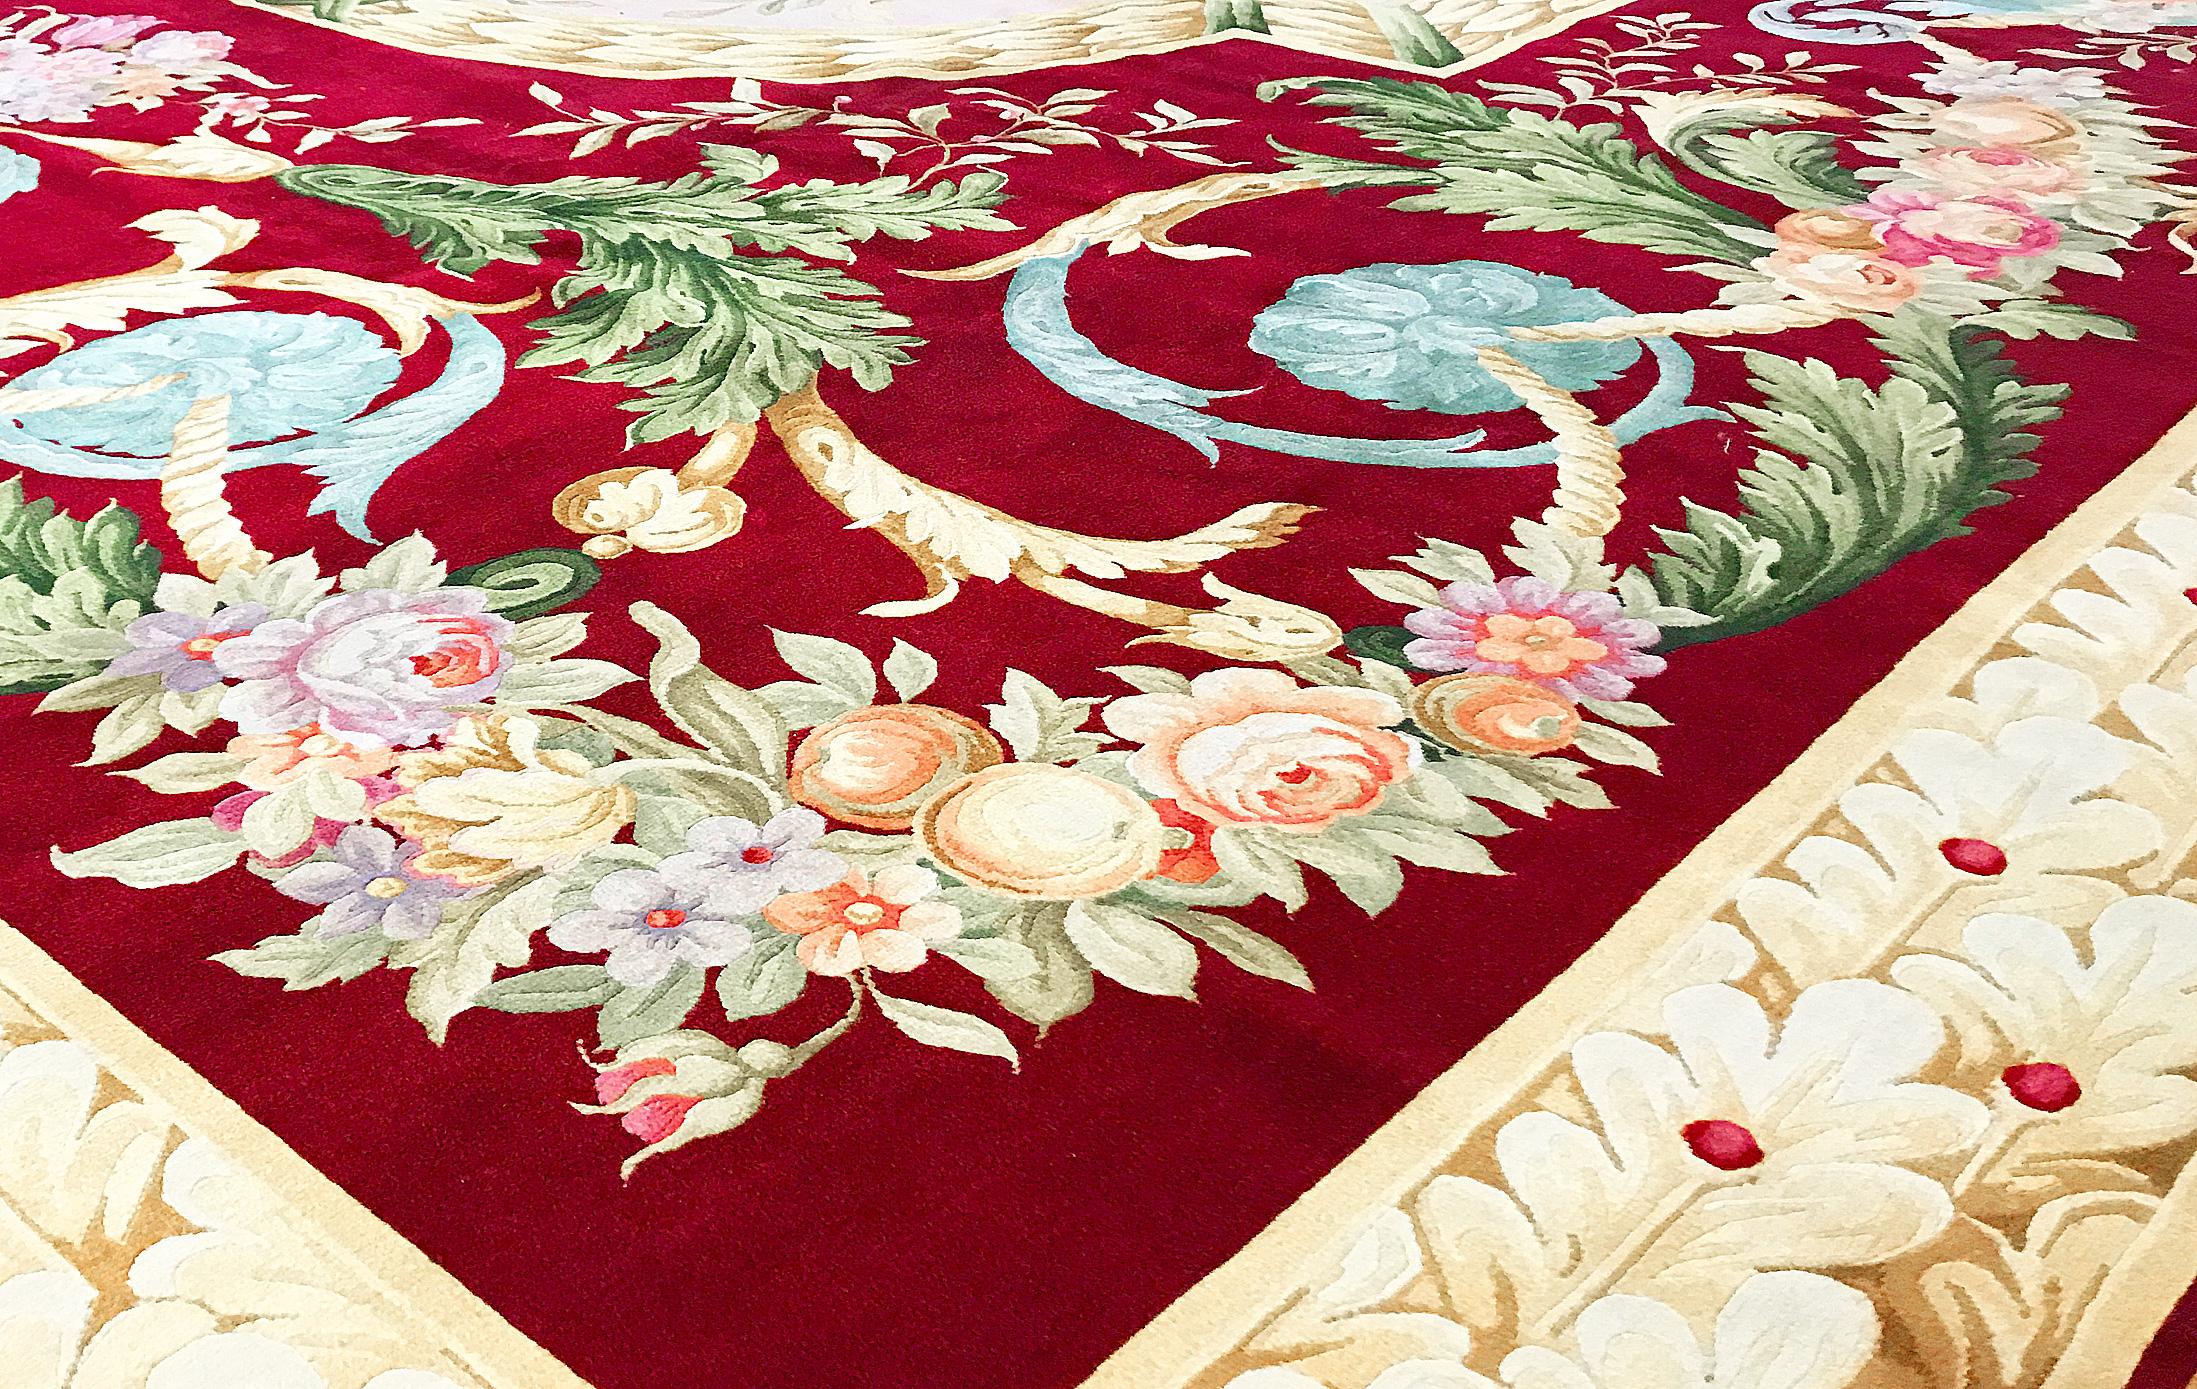 Recreation of a Classic French designs using the finest of materials and skilled weavers. This thick plush rug is handwoven in China and exudes the feeling of the best in European style and quality. French Savonnerie carpets have been produced since